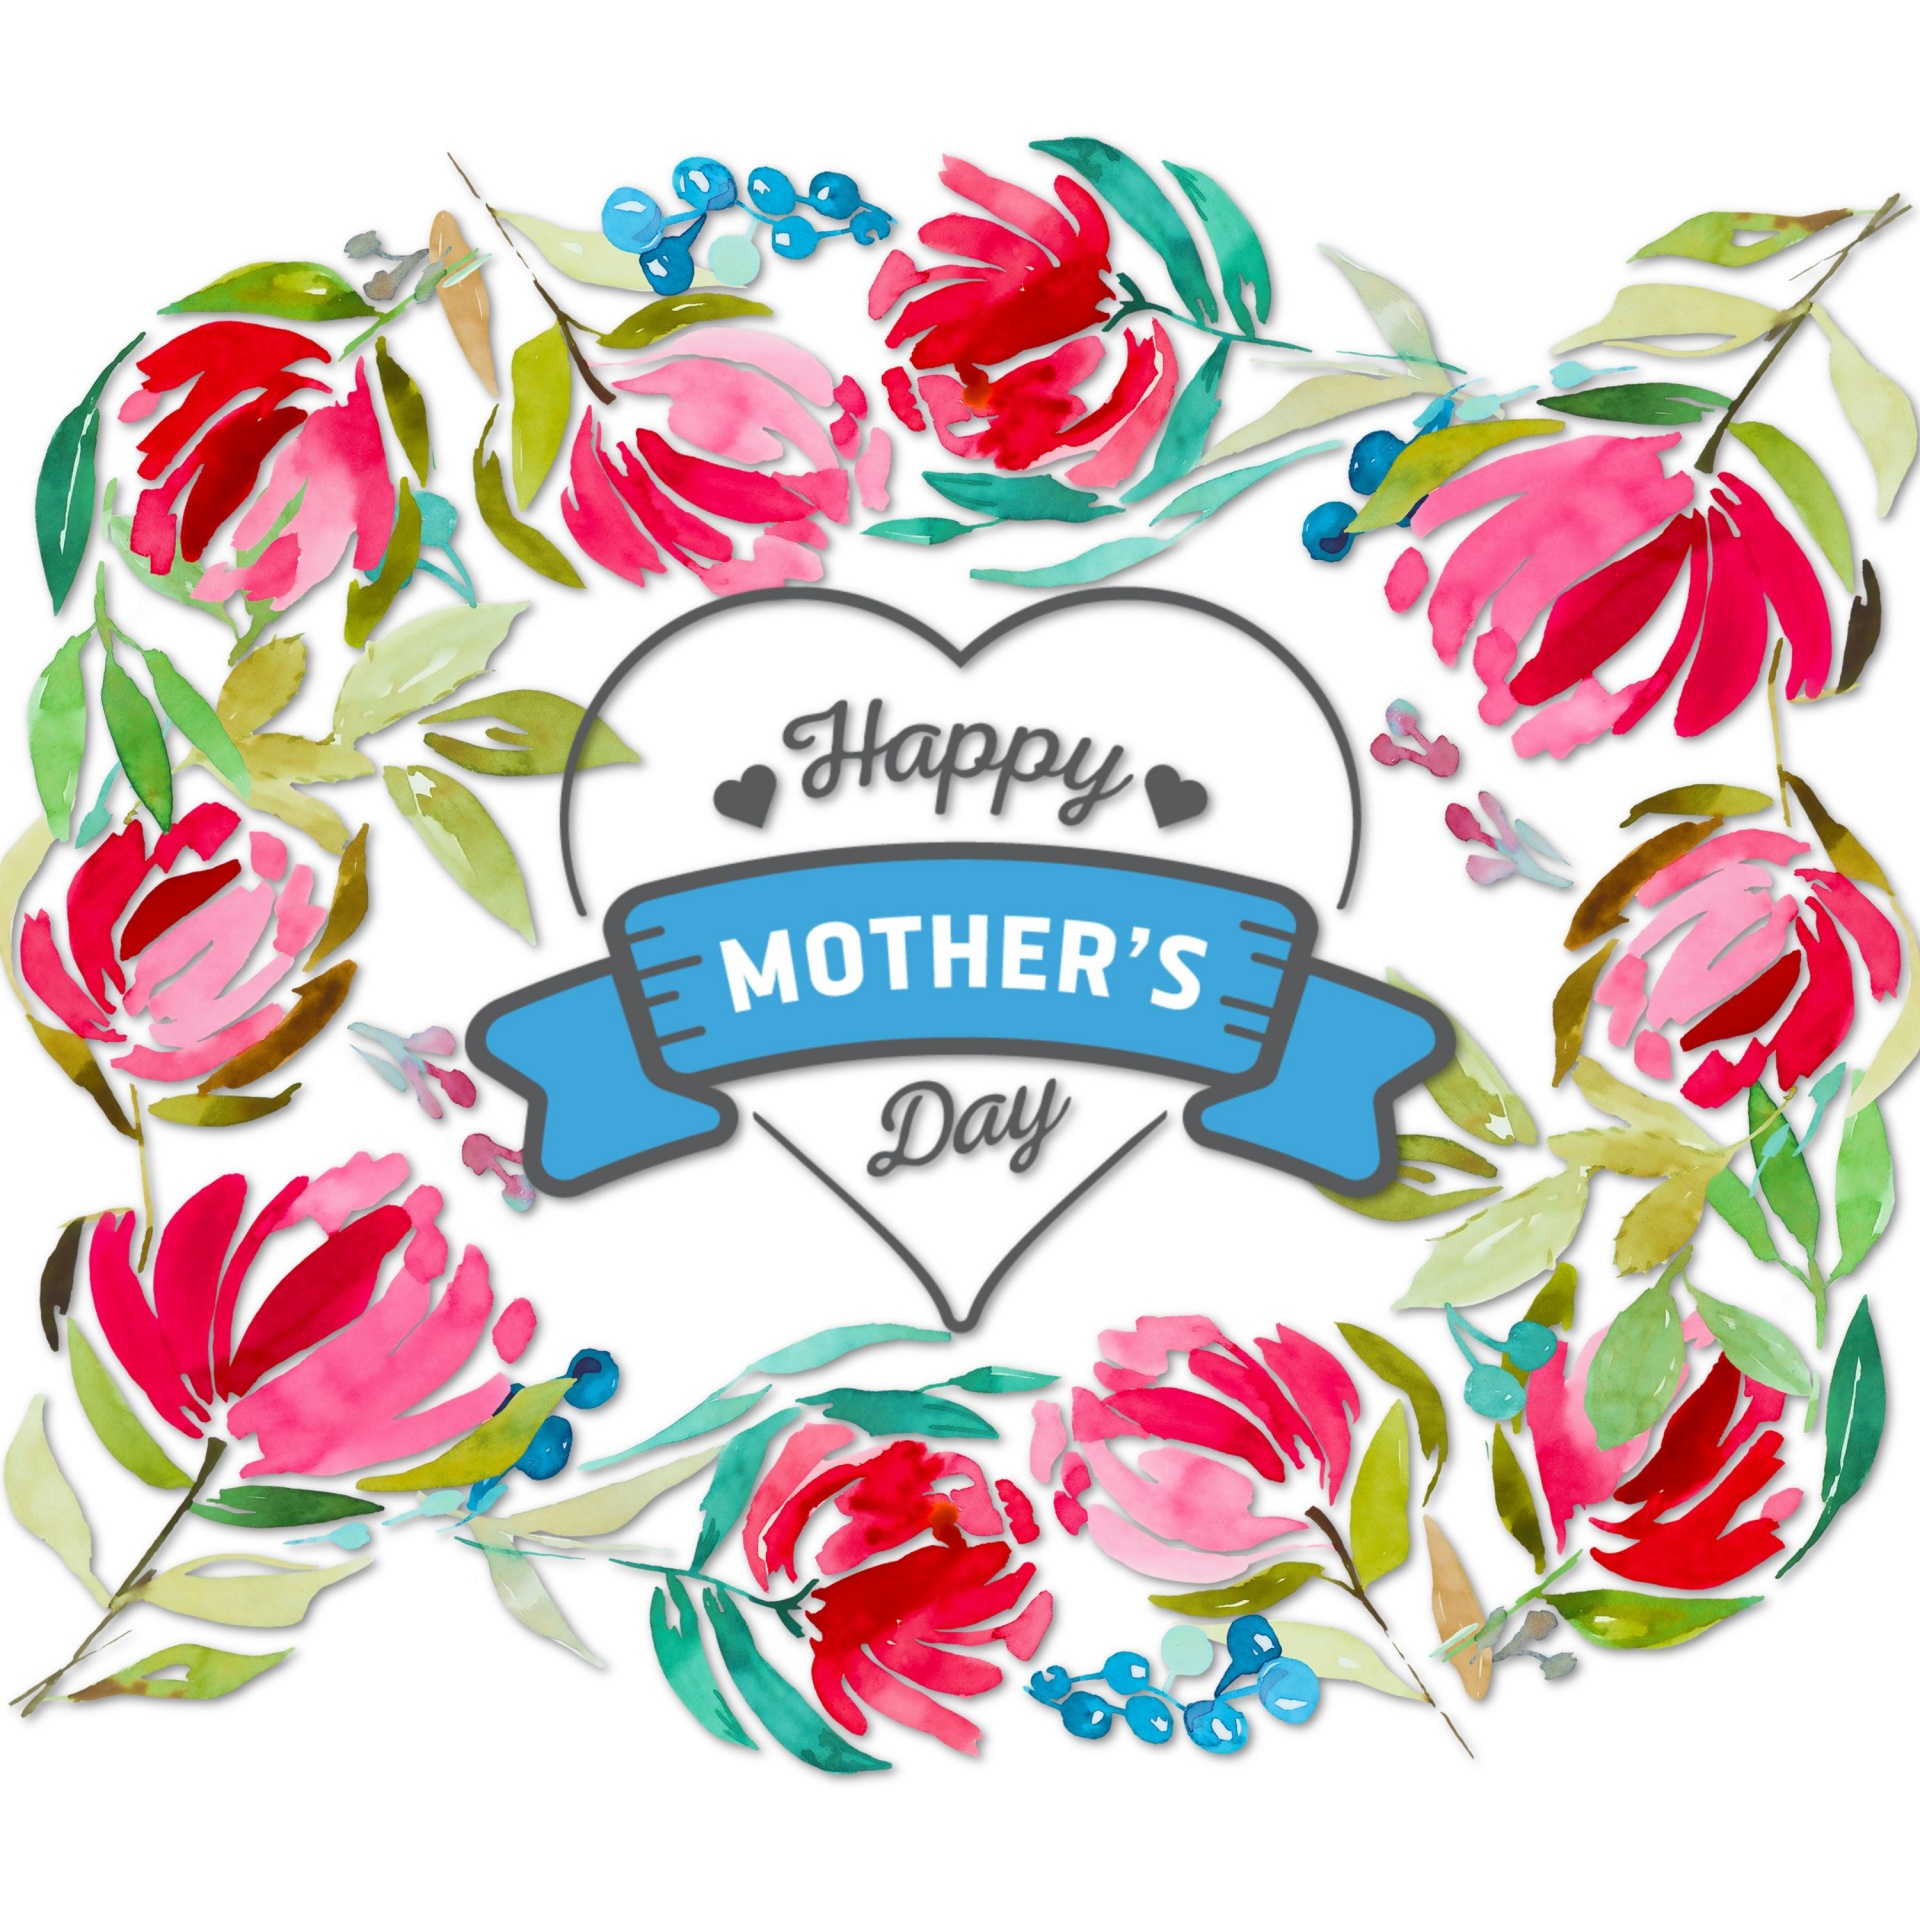 mother-s-day-card-free-stock-photo-public-domain-pictures